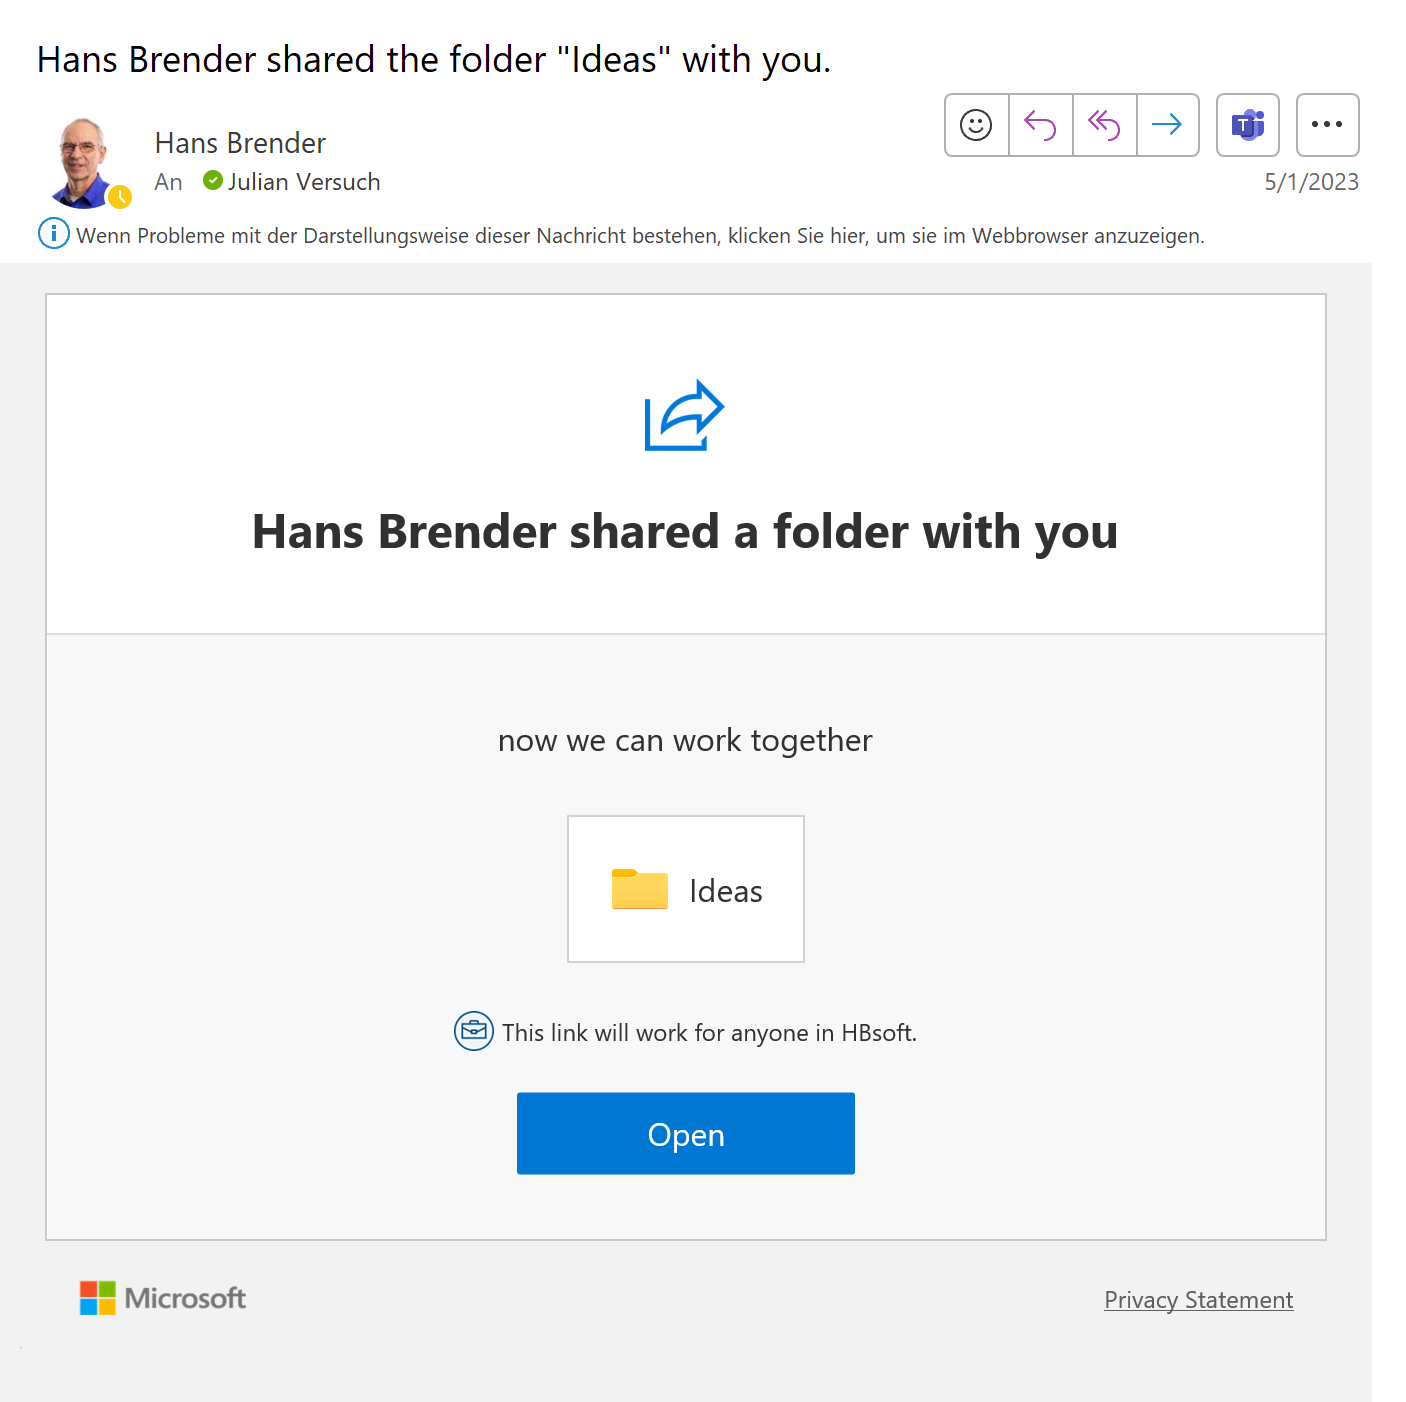 The image shows an invitation to edit a folder with another OneDrive user.